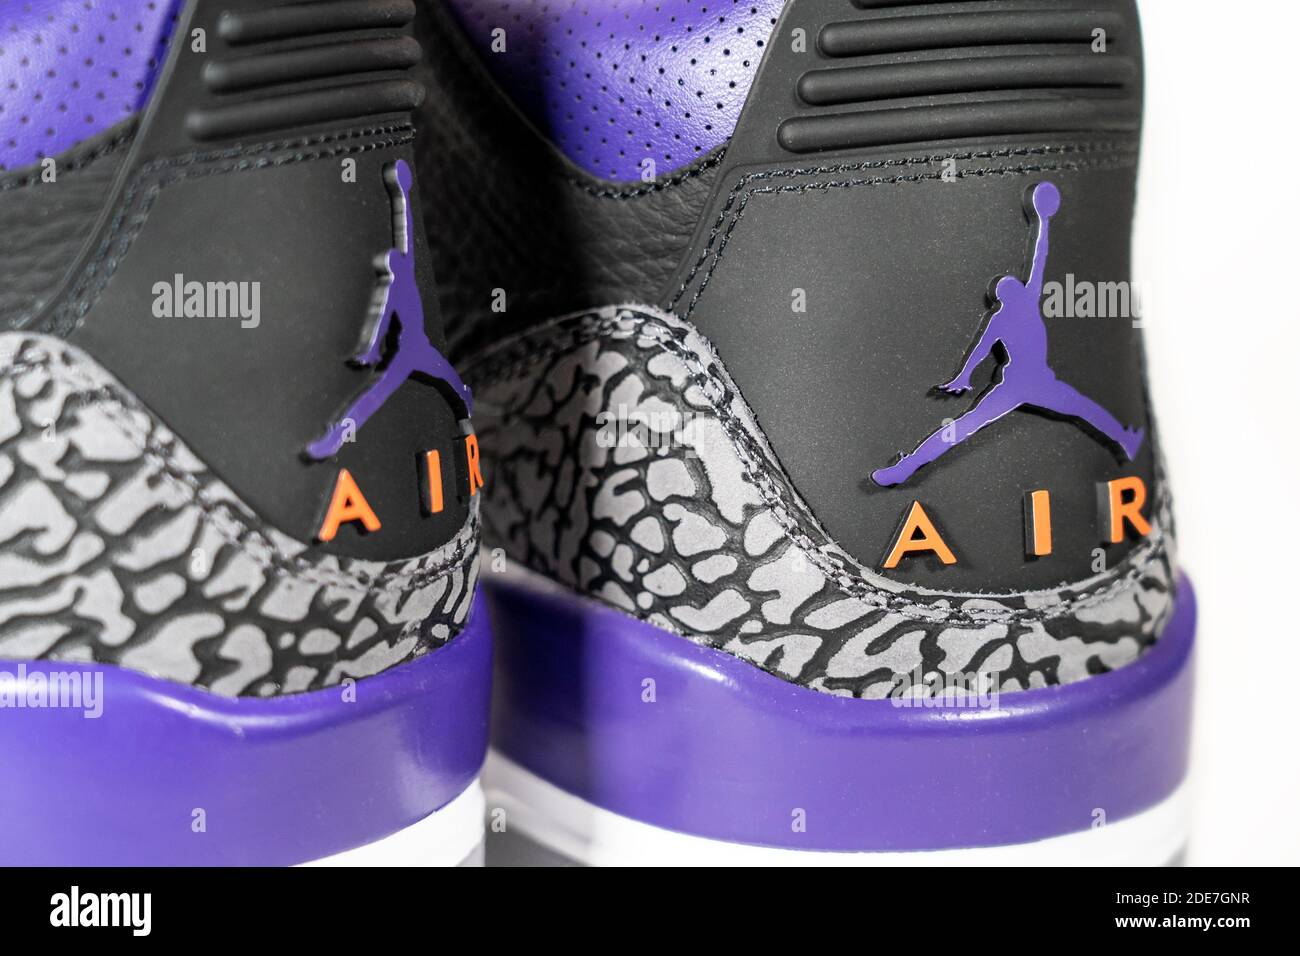 Air Jordan 3 Retro Court Purple - Legendary famous Nike and Jordan Brand  retro basketball sneakers or sport shoes, now fashion and lifestyle shoes :  Moscow, Russia - November 2020 Stock Photo - Alamy